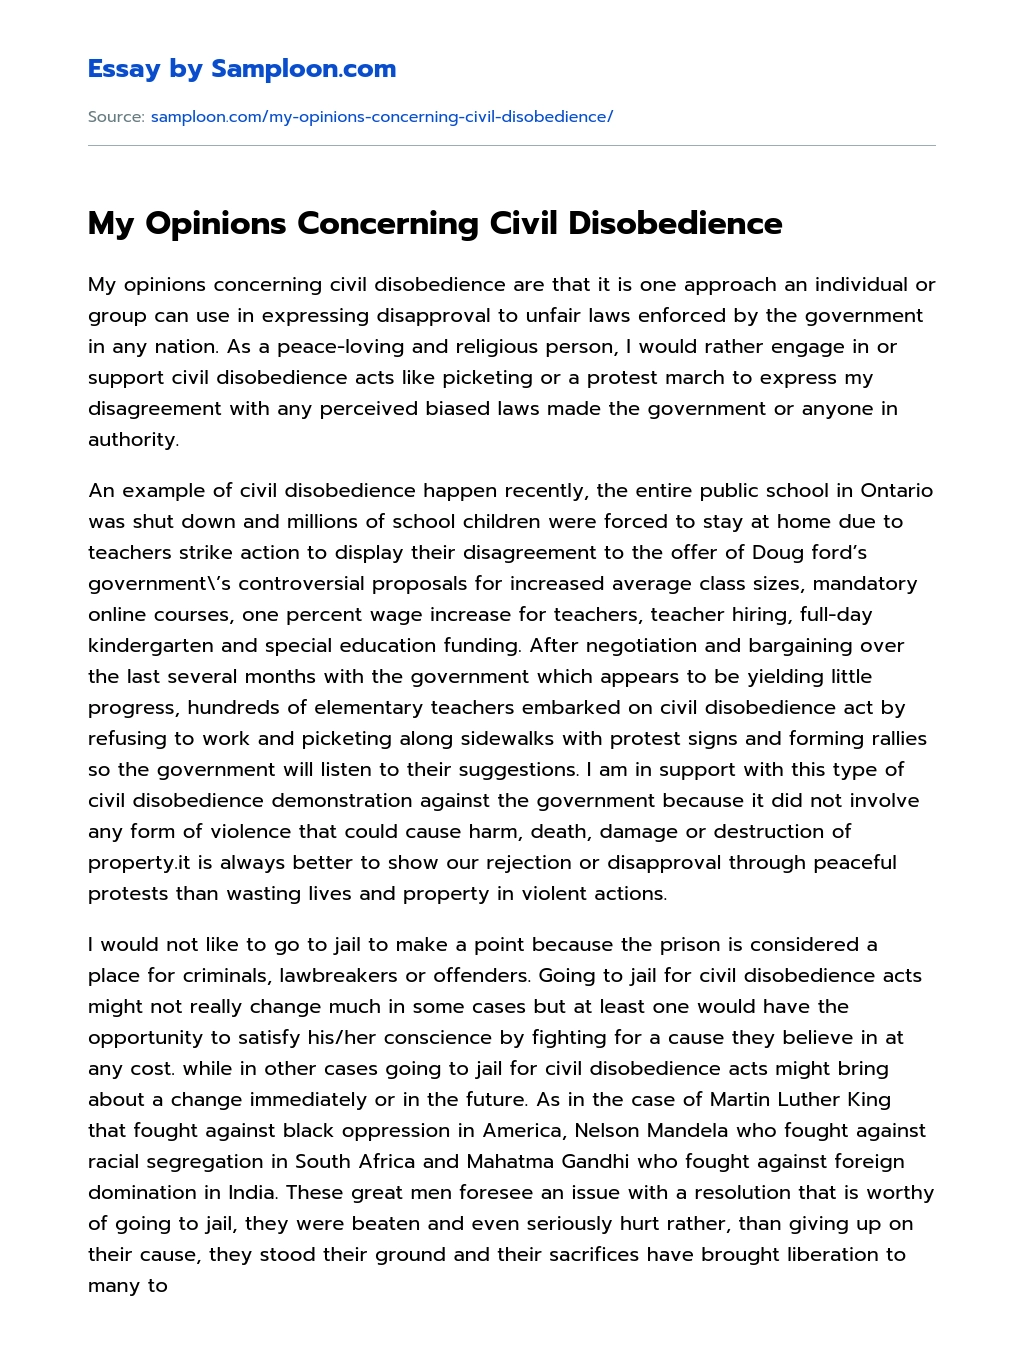 My Opinions Concerning Civil Disobedience essay